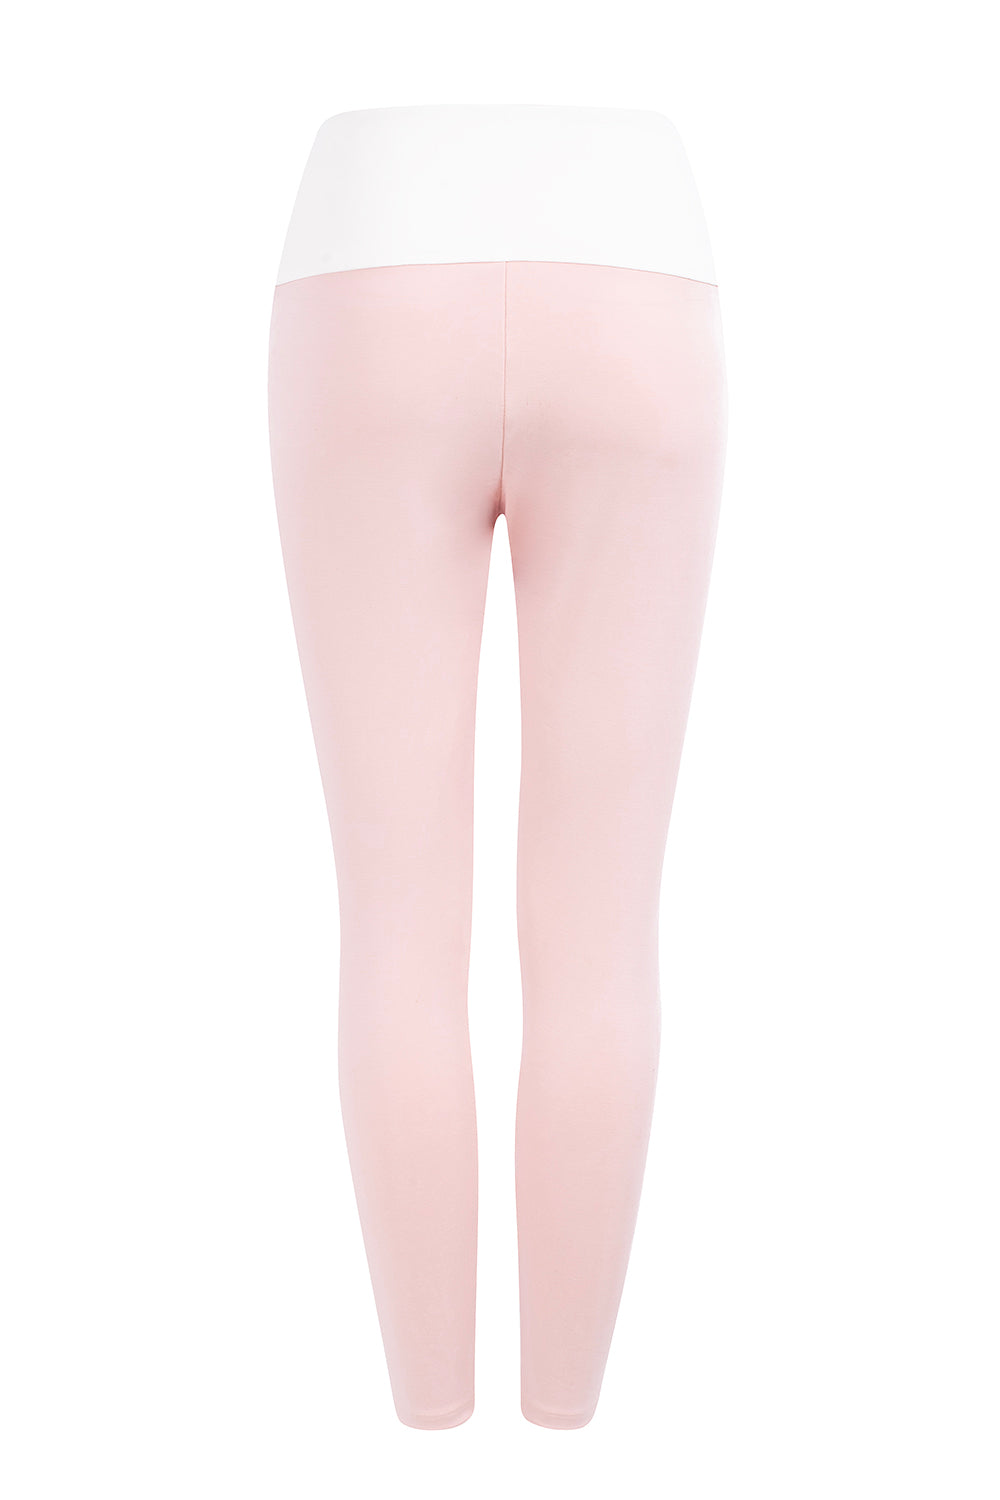 SOFT TOUCH PINK LEGGINGS – Missus